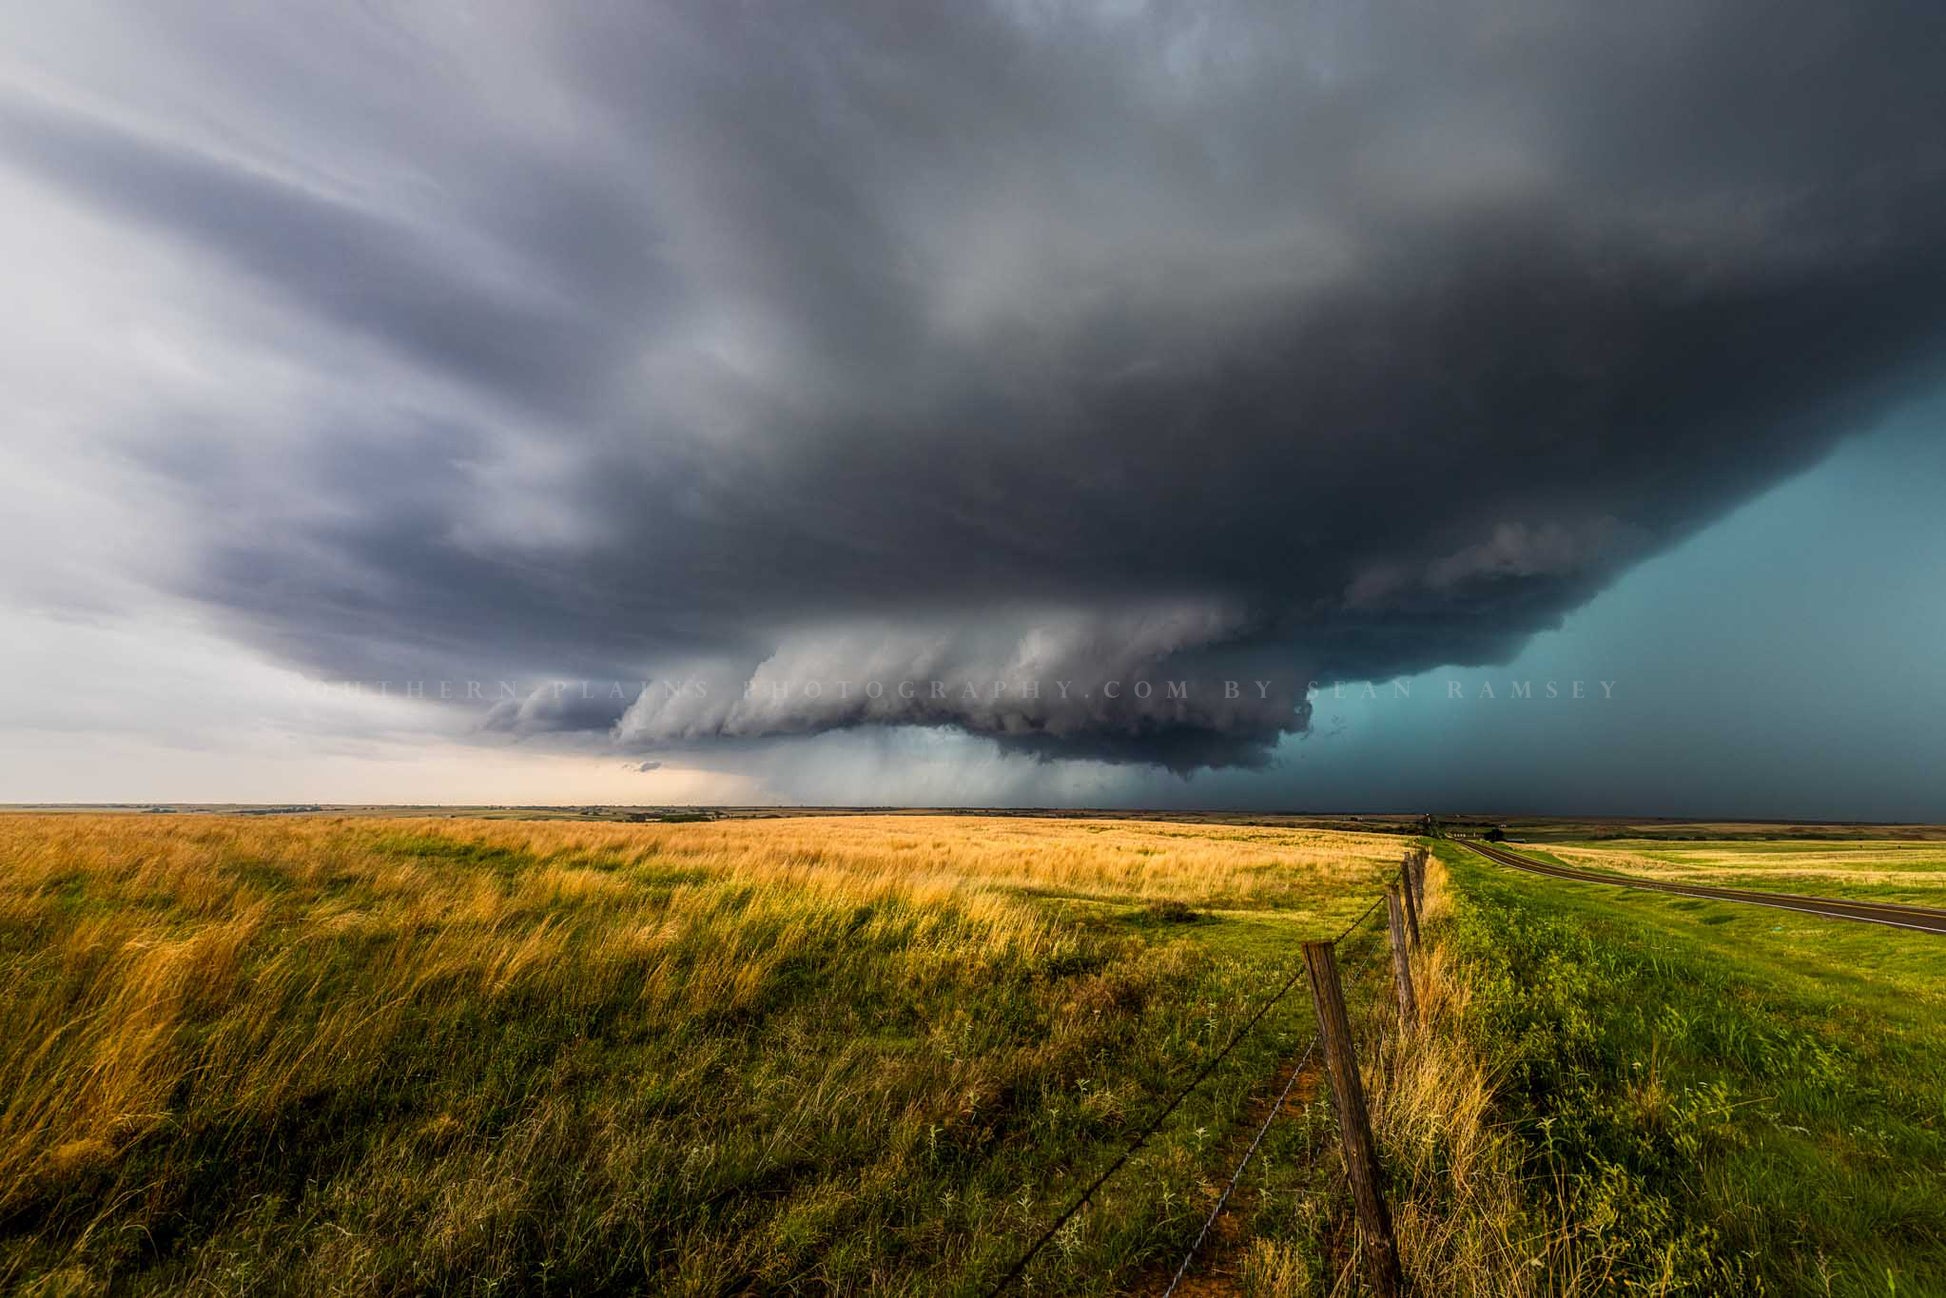 Storm photography print of a supercell thunderstorm developing over open prairie on a spring day in Oklahoma by Sean Ramsey of Southern Plains Photography.